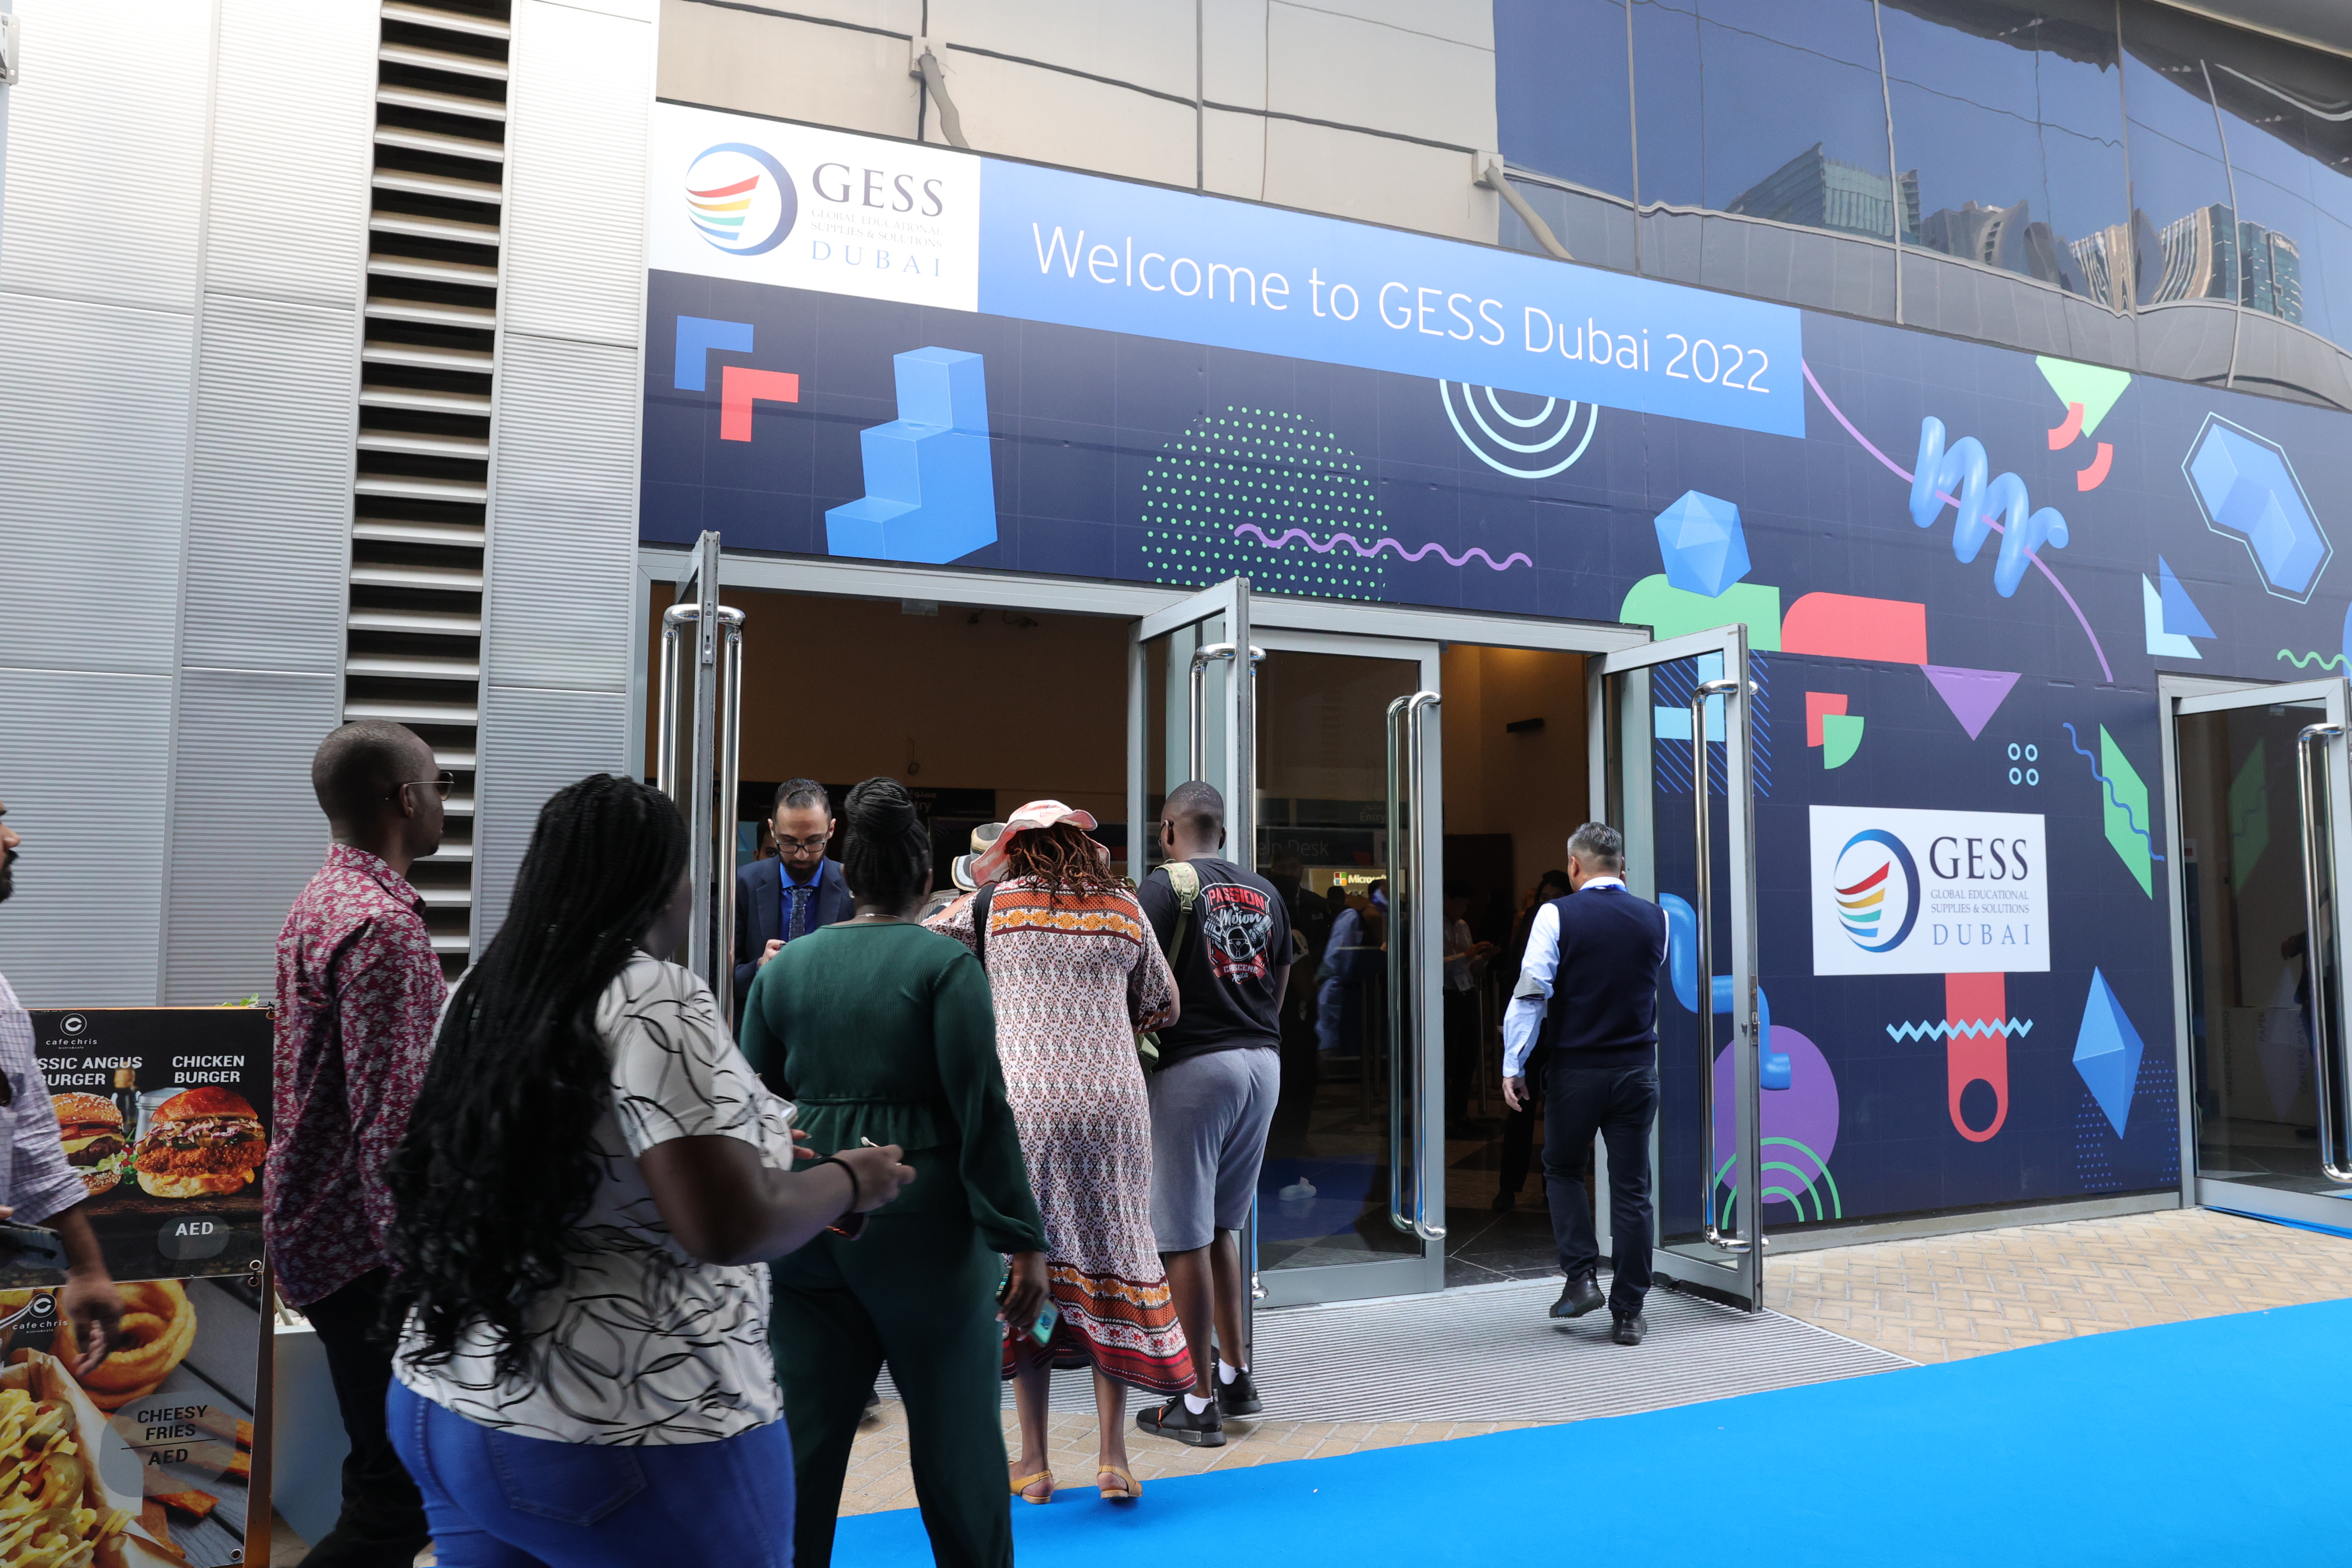 Visitors arriving to GESS Dubai exhibition and conference 